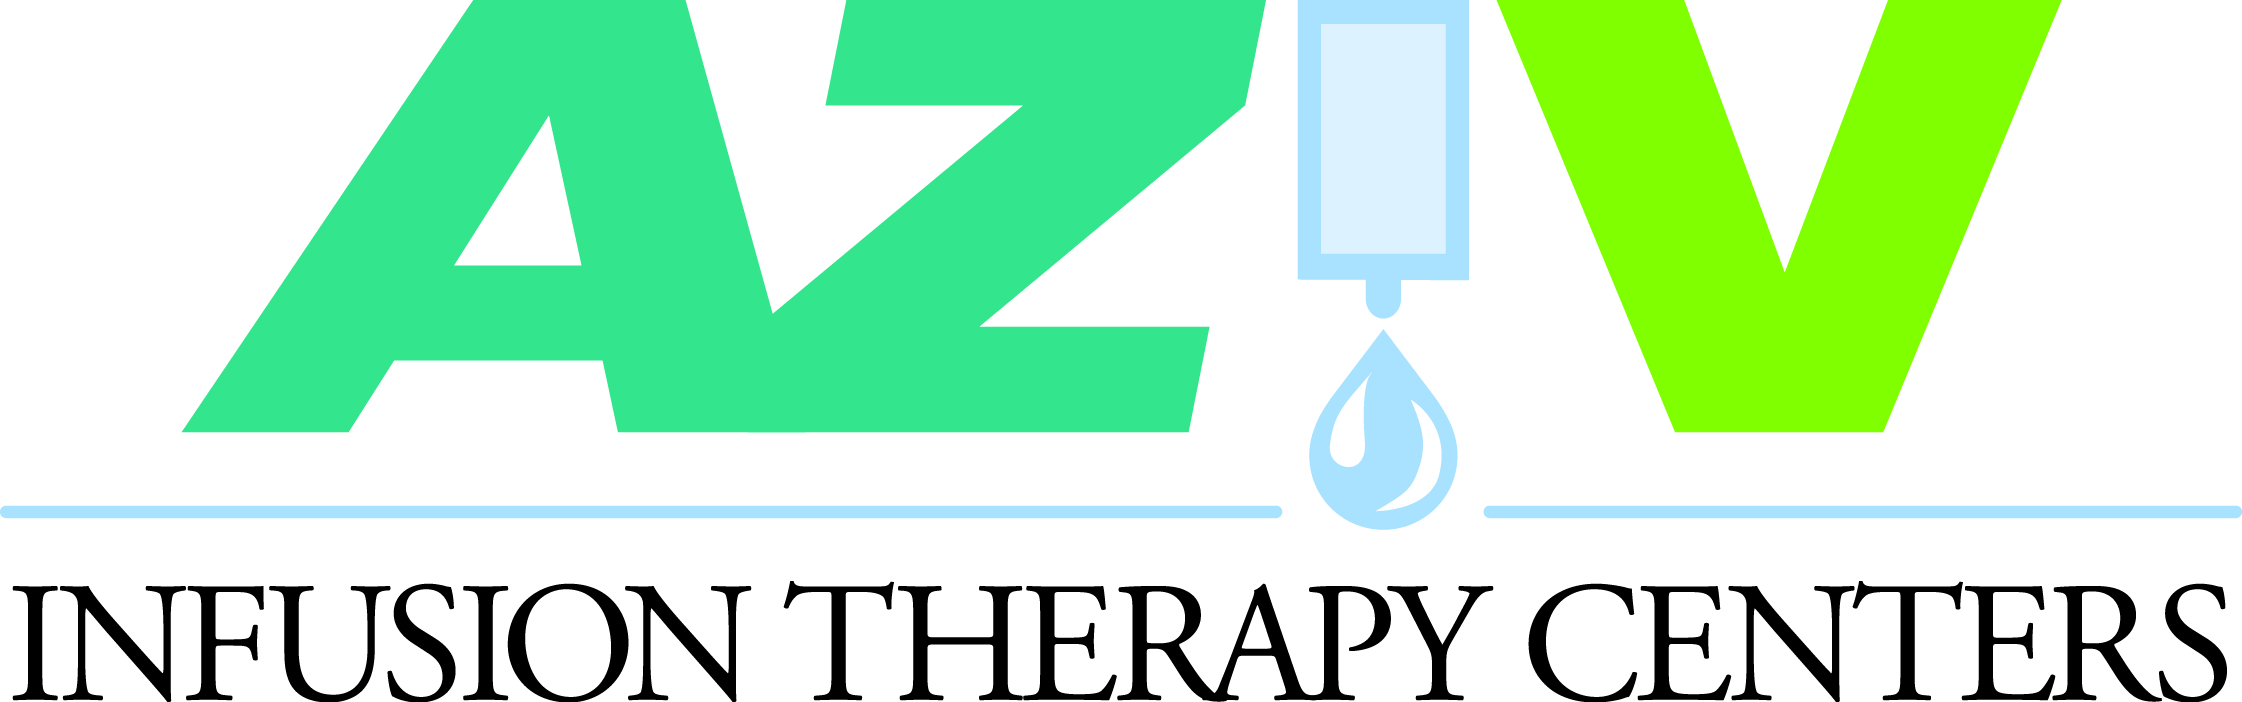 AZIV Infusion Therapy Center